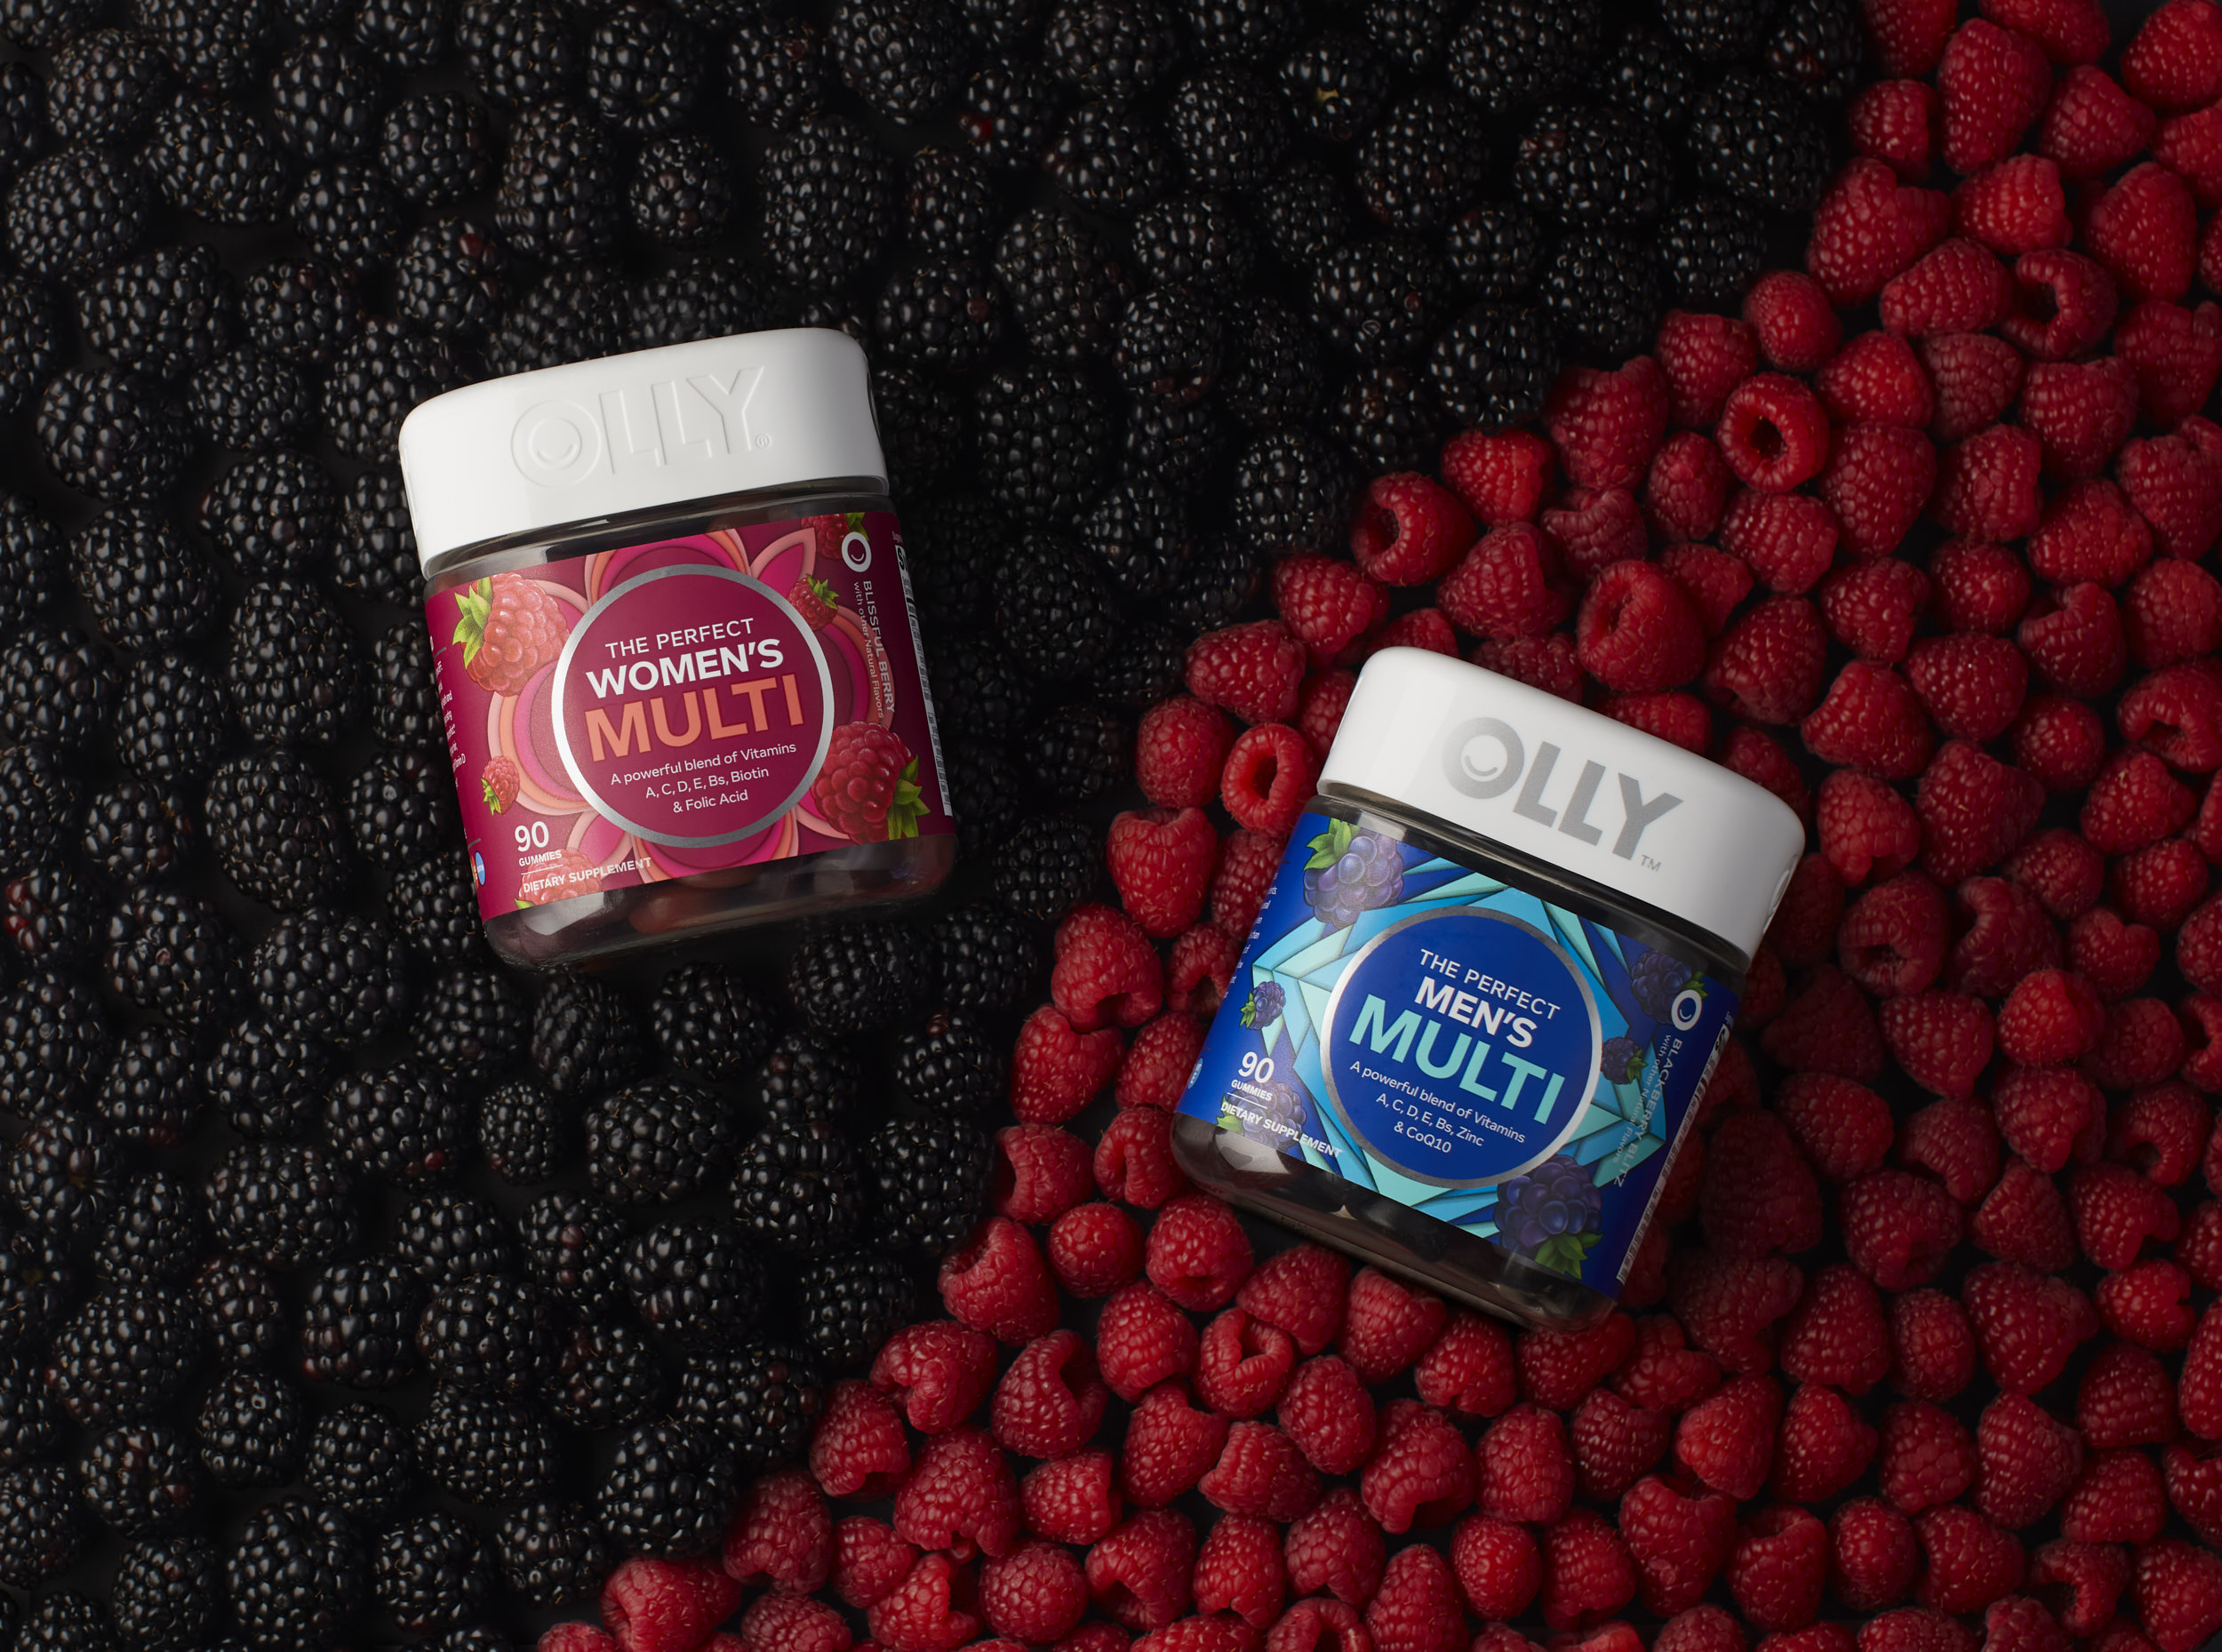 Olly Multi Vitamins on a bed of fruit in still life product photo.